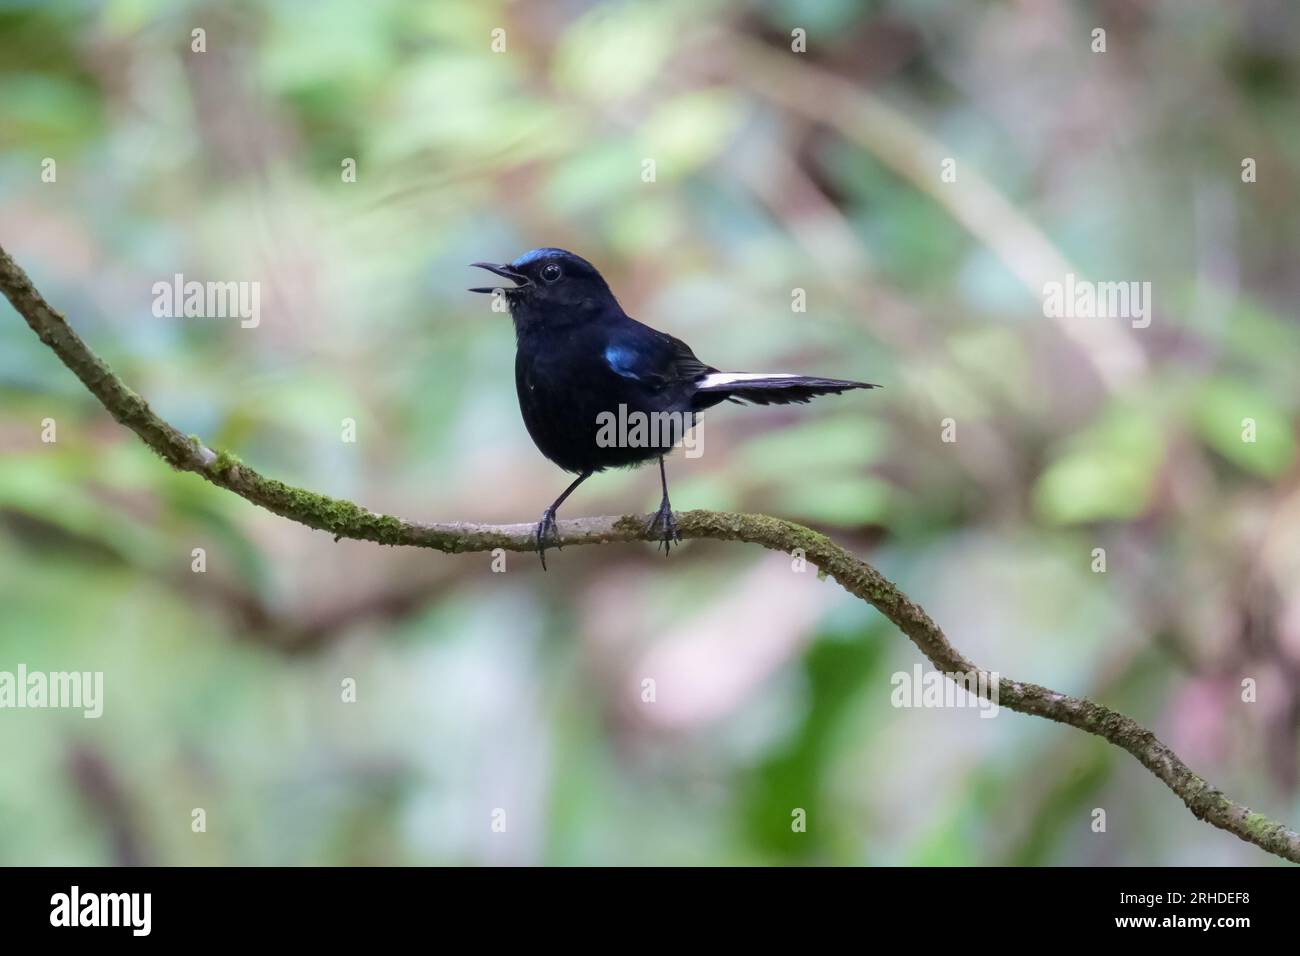 A White-tailed Robin perched on a tree branch in Fraser's Hill. Cute black and white bird on blurred nature background. Birdwatching, birding in Malay Stock Photo